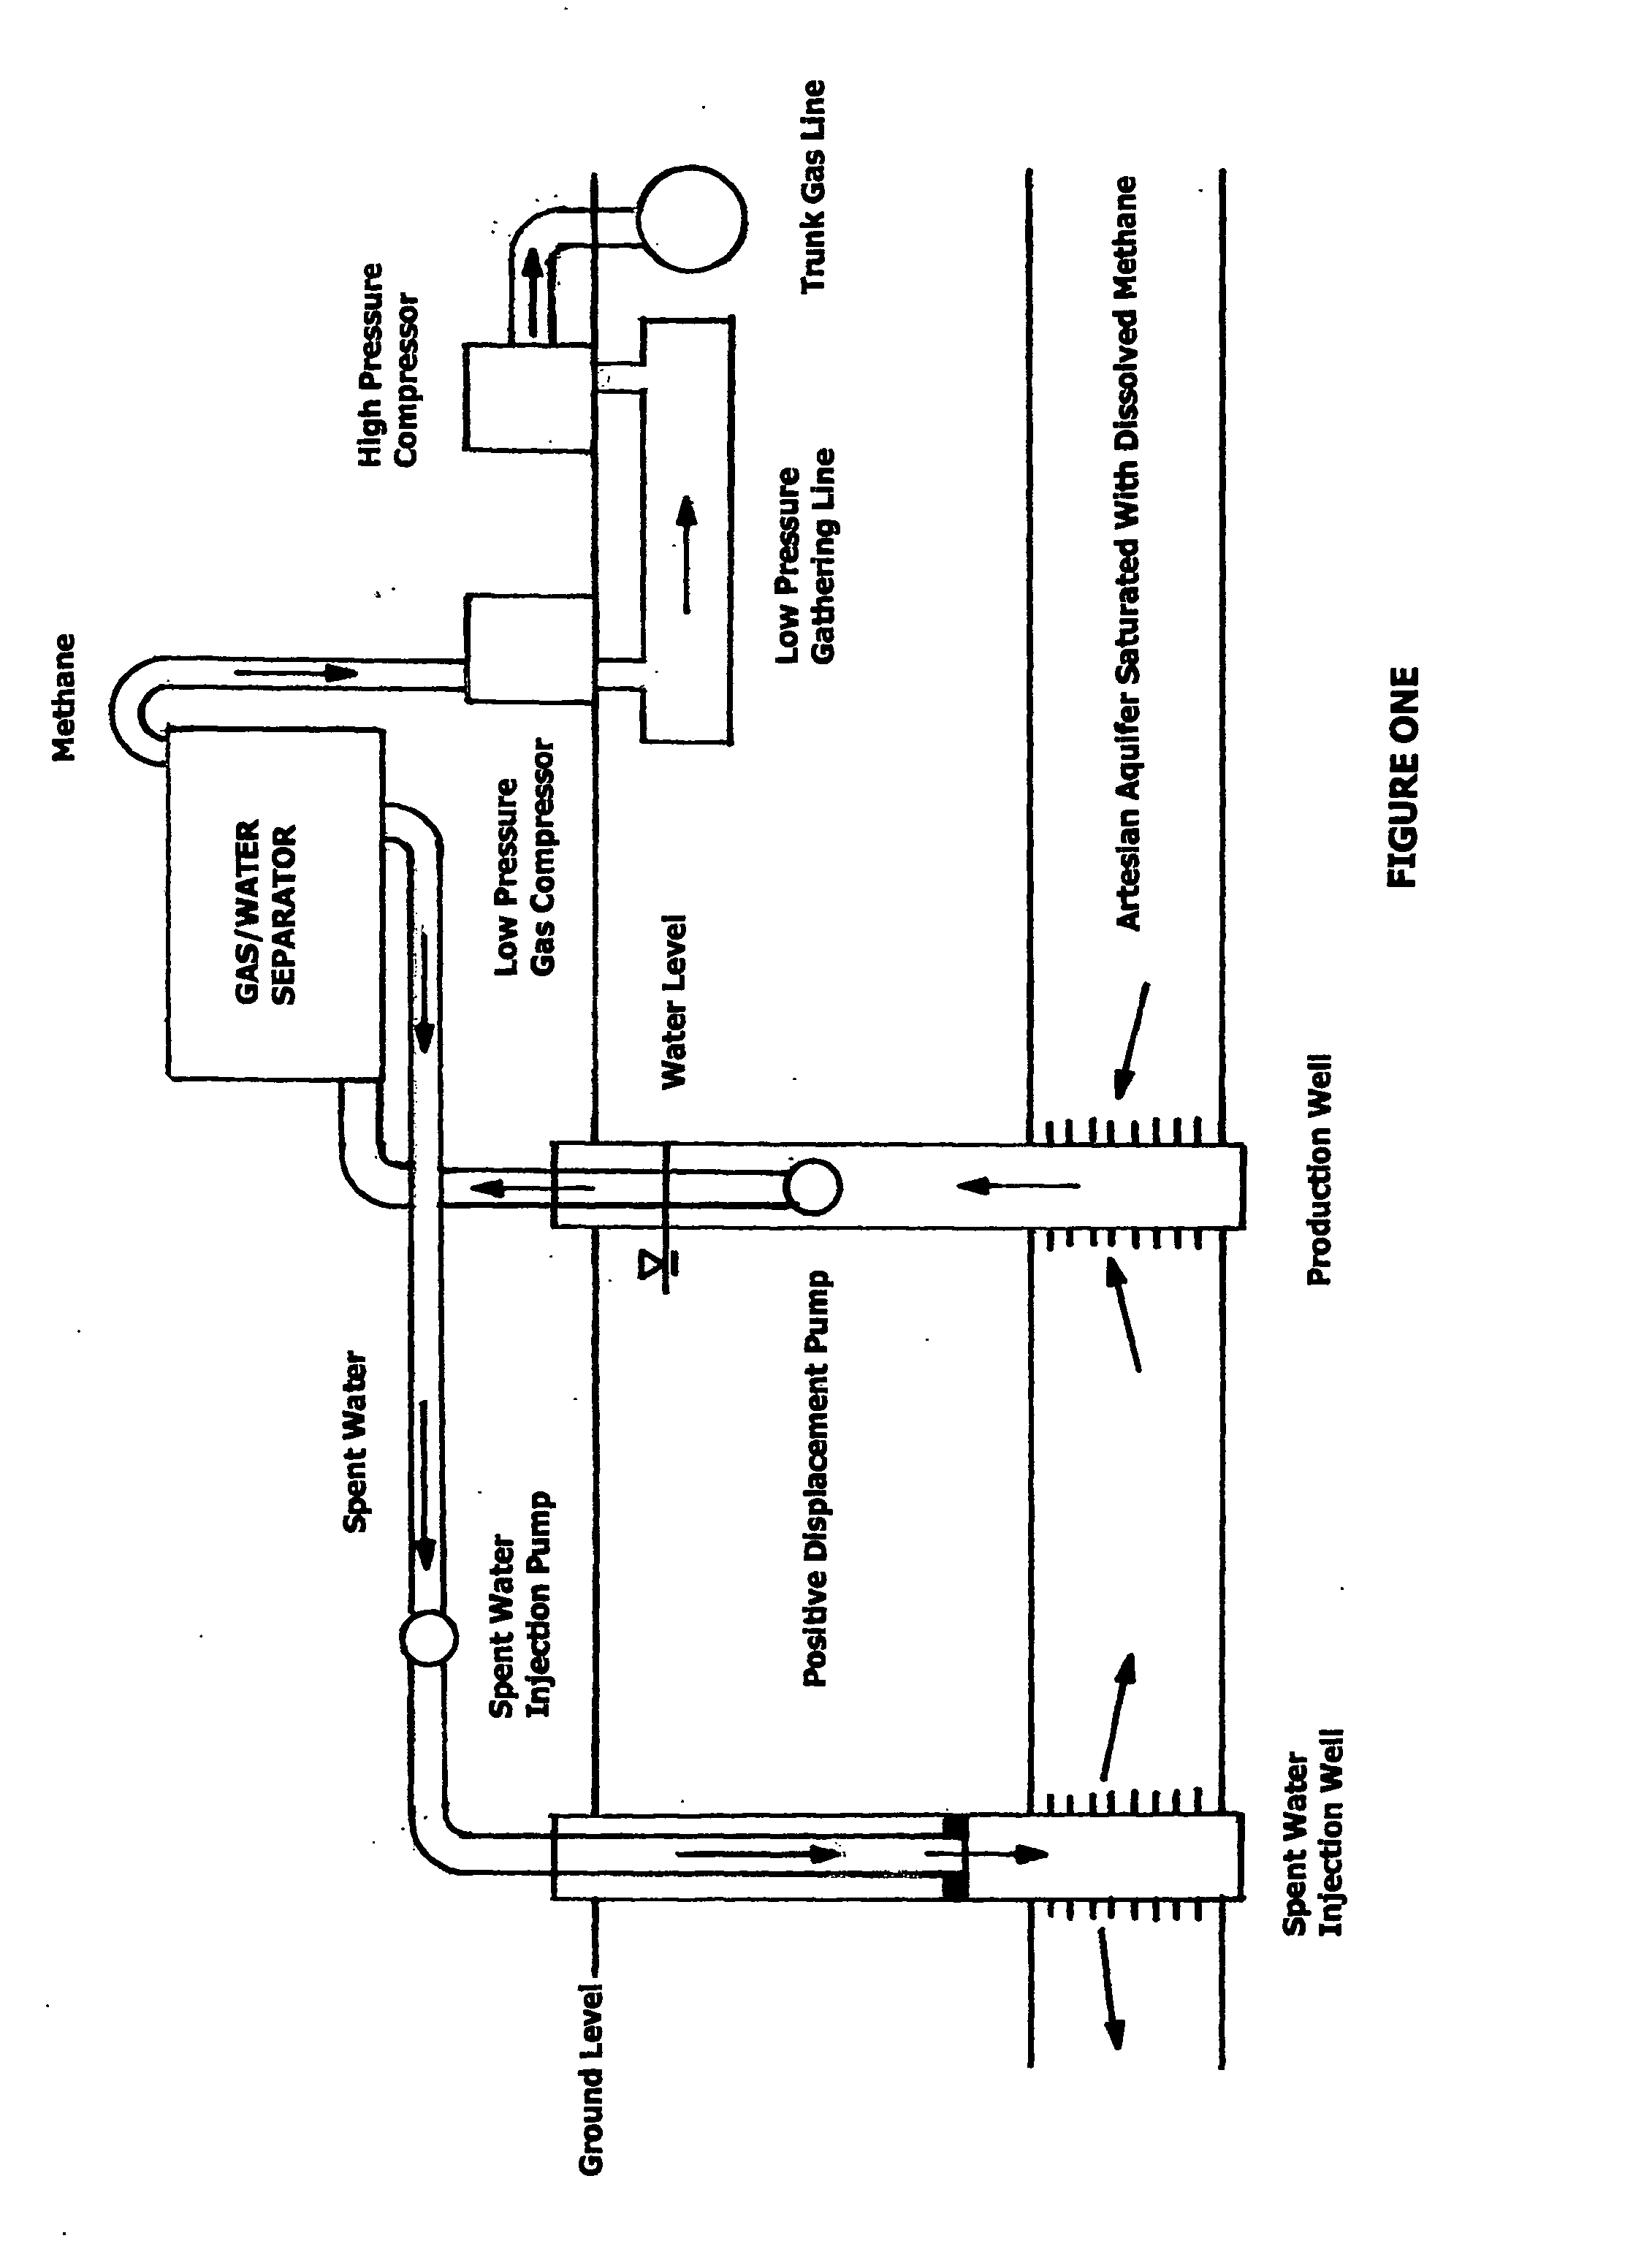 Process for extracting dissolved methane from hydropressured aquifers